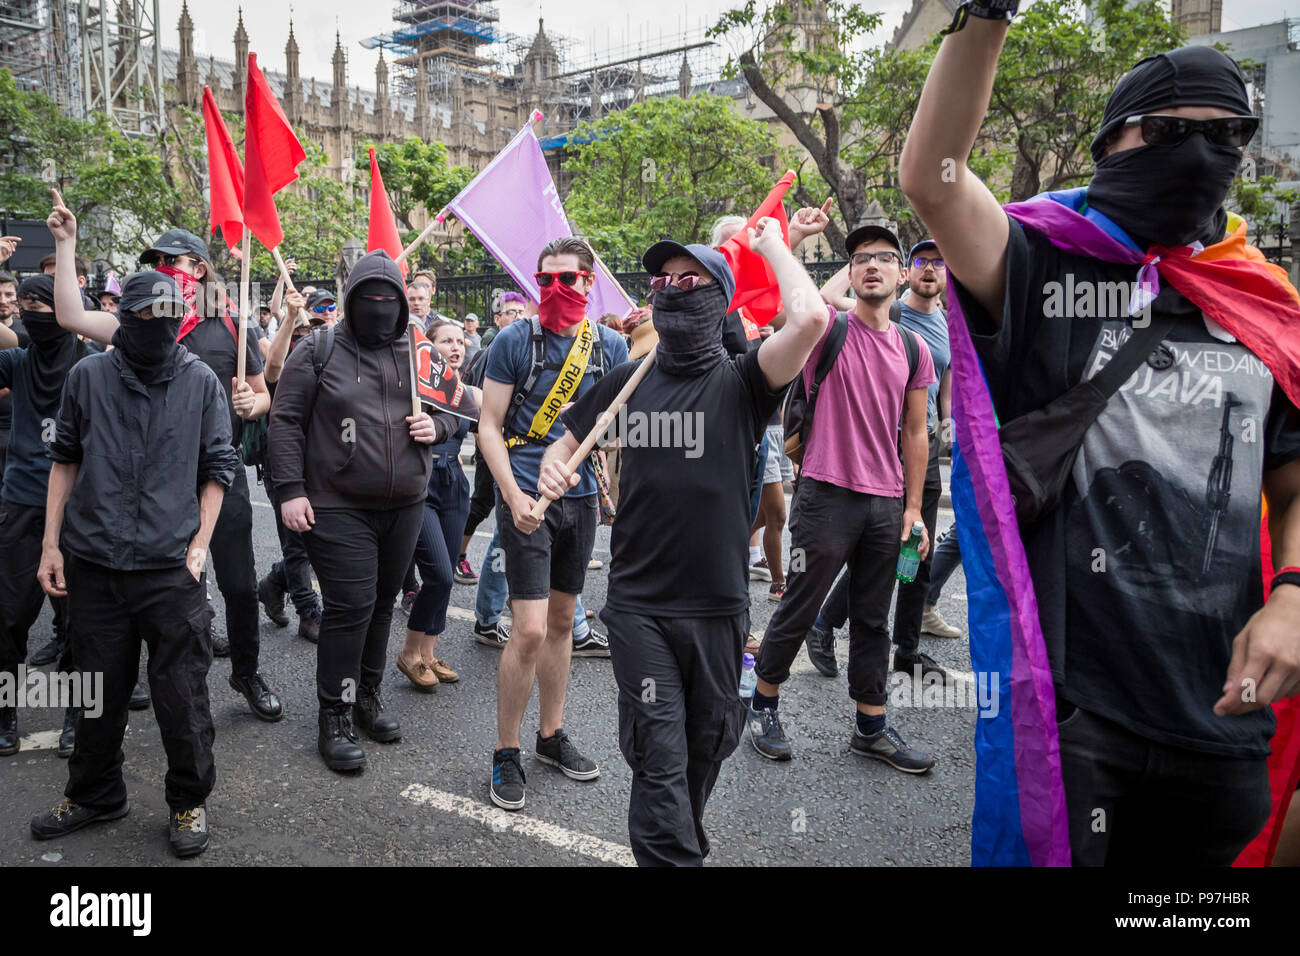 London, UK. 14th July 2018. Anti-fascist protesters clash with right-wing pro-Trump, ‘Free Tommy Robinson’ supporters and police in Westminster as Donald Trump visits London. Credit: Guy Corbishley/Alamy Live News Stock Photo